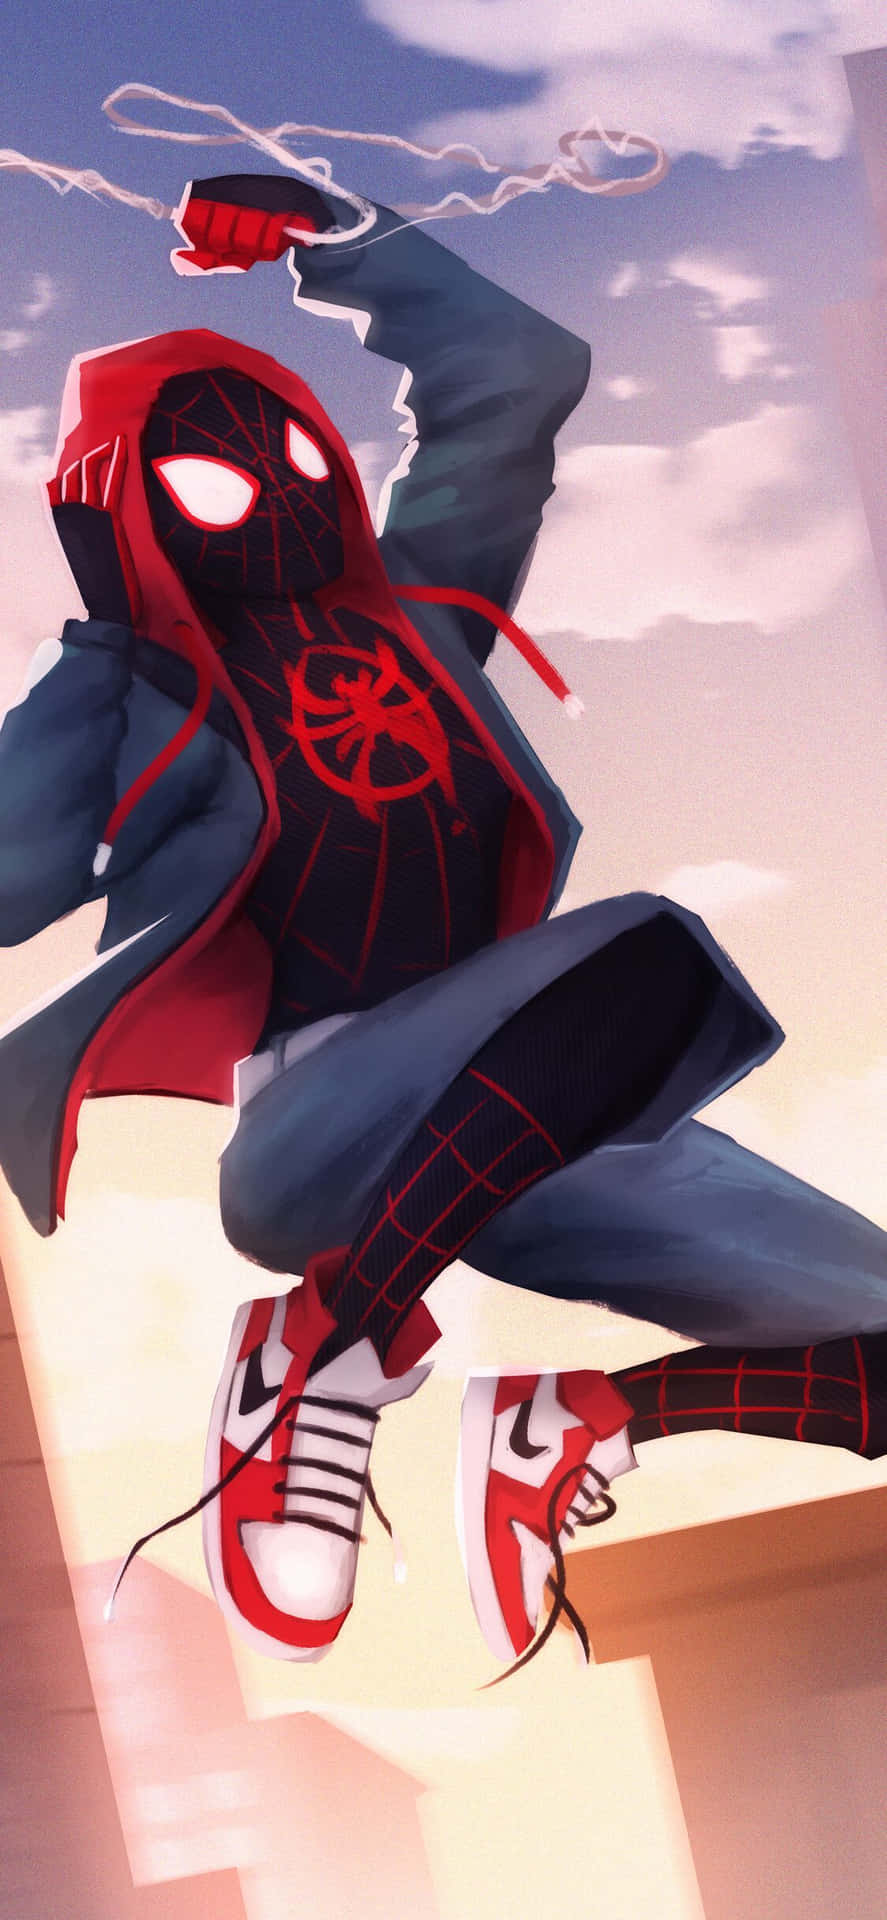 Miles Morales PS5  iOS16  riphonewallpapers